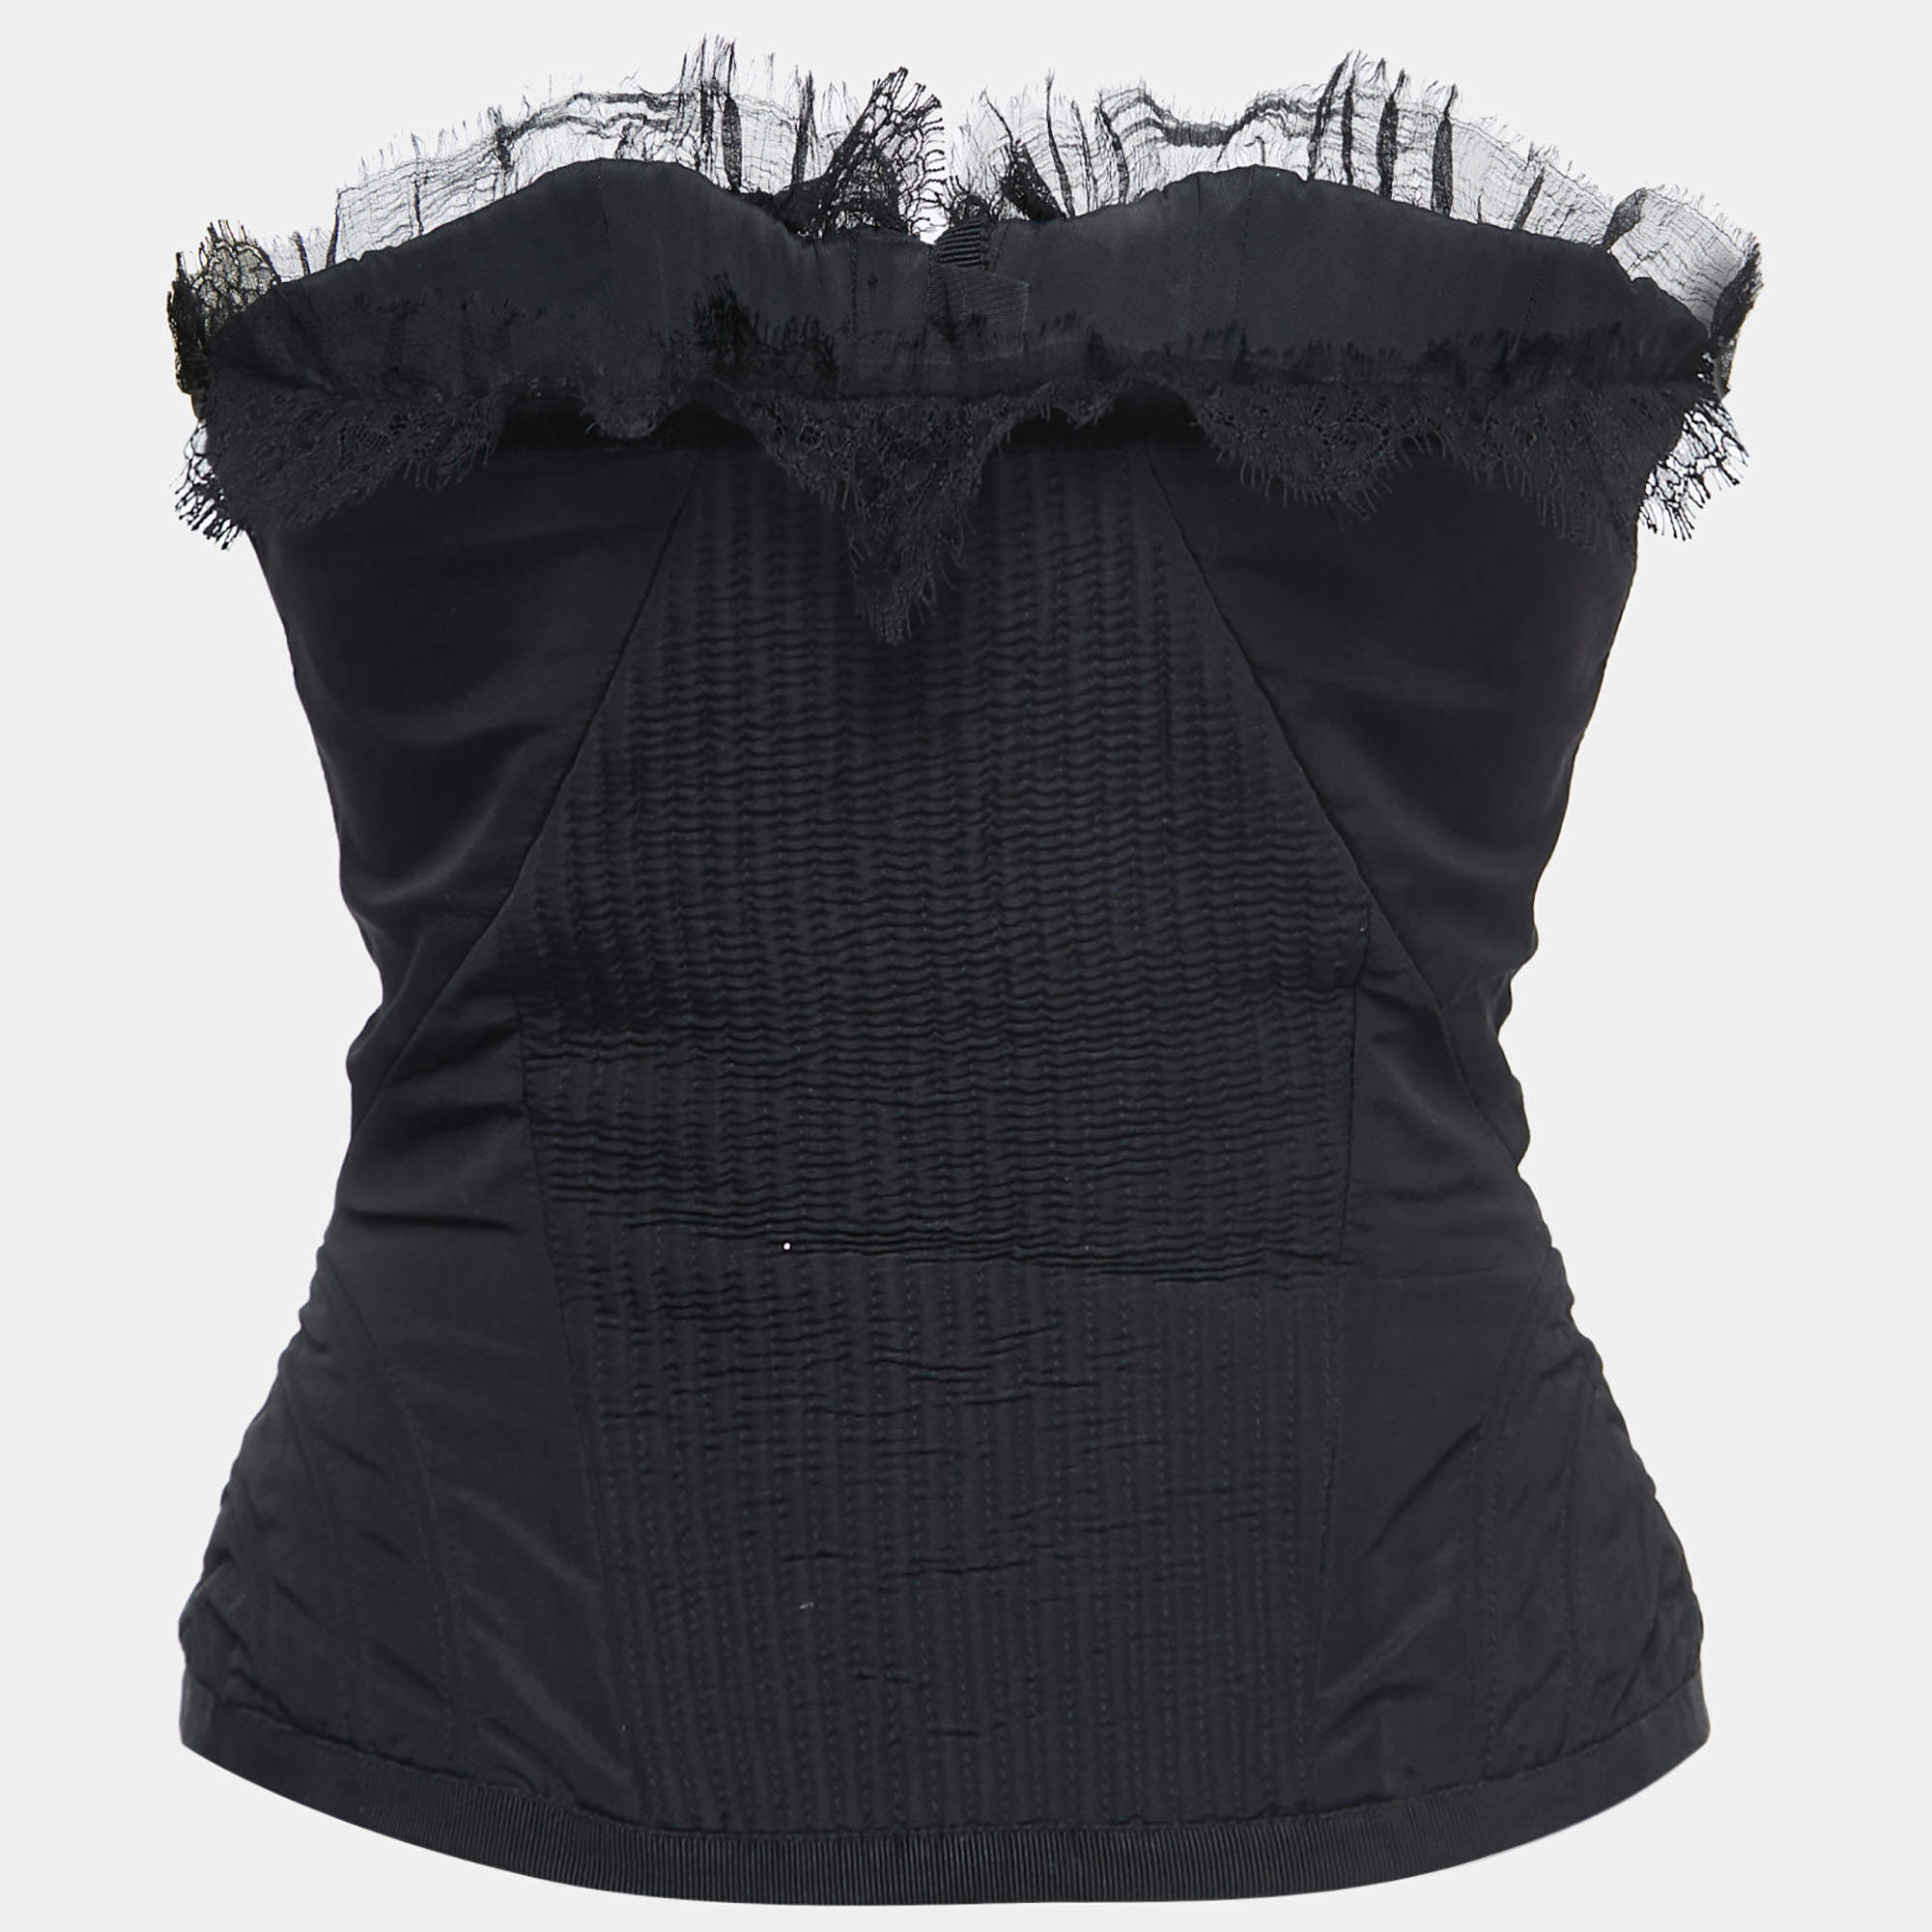 Lace bustier in black - Gucci